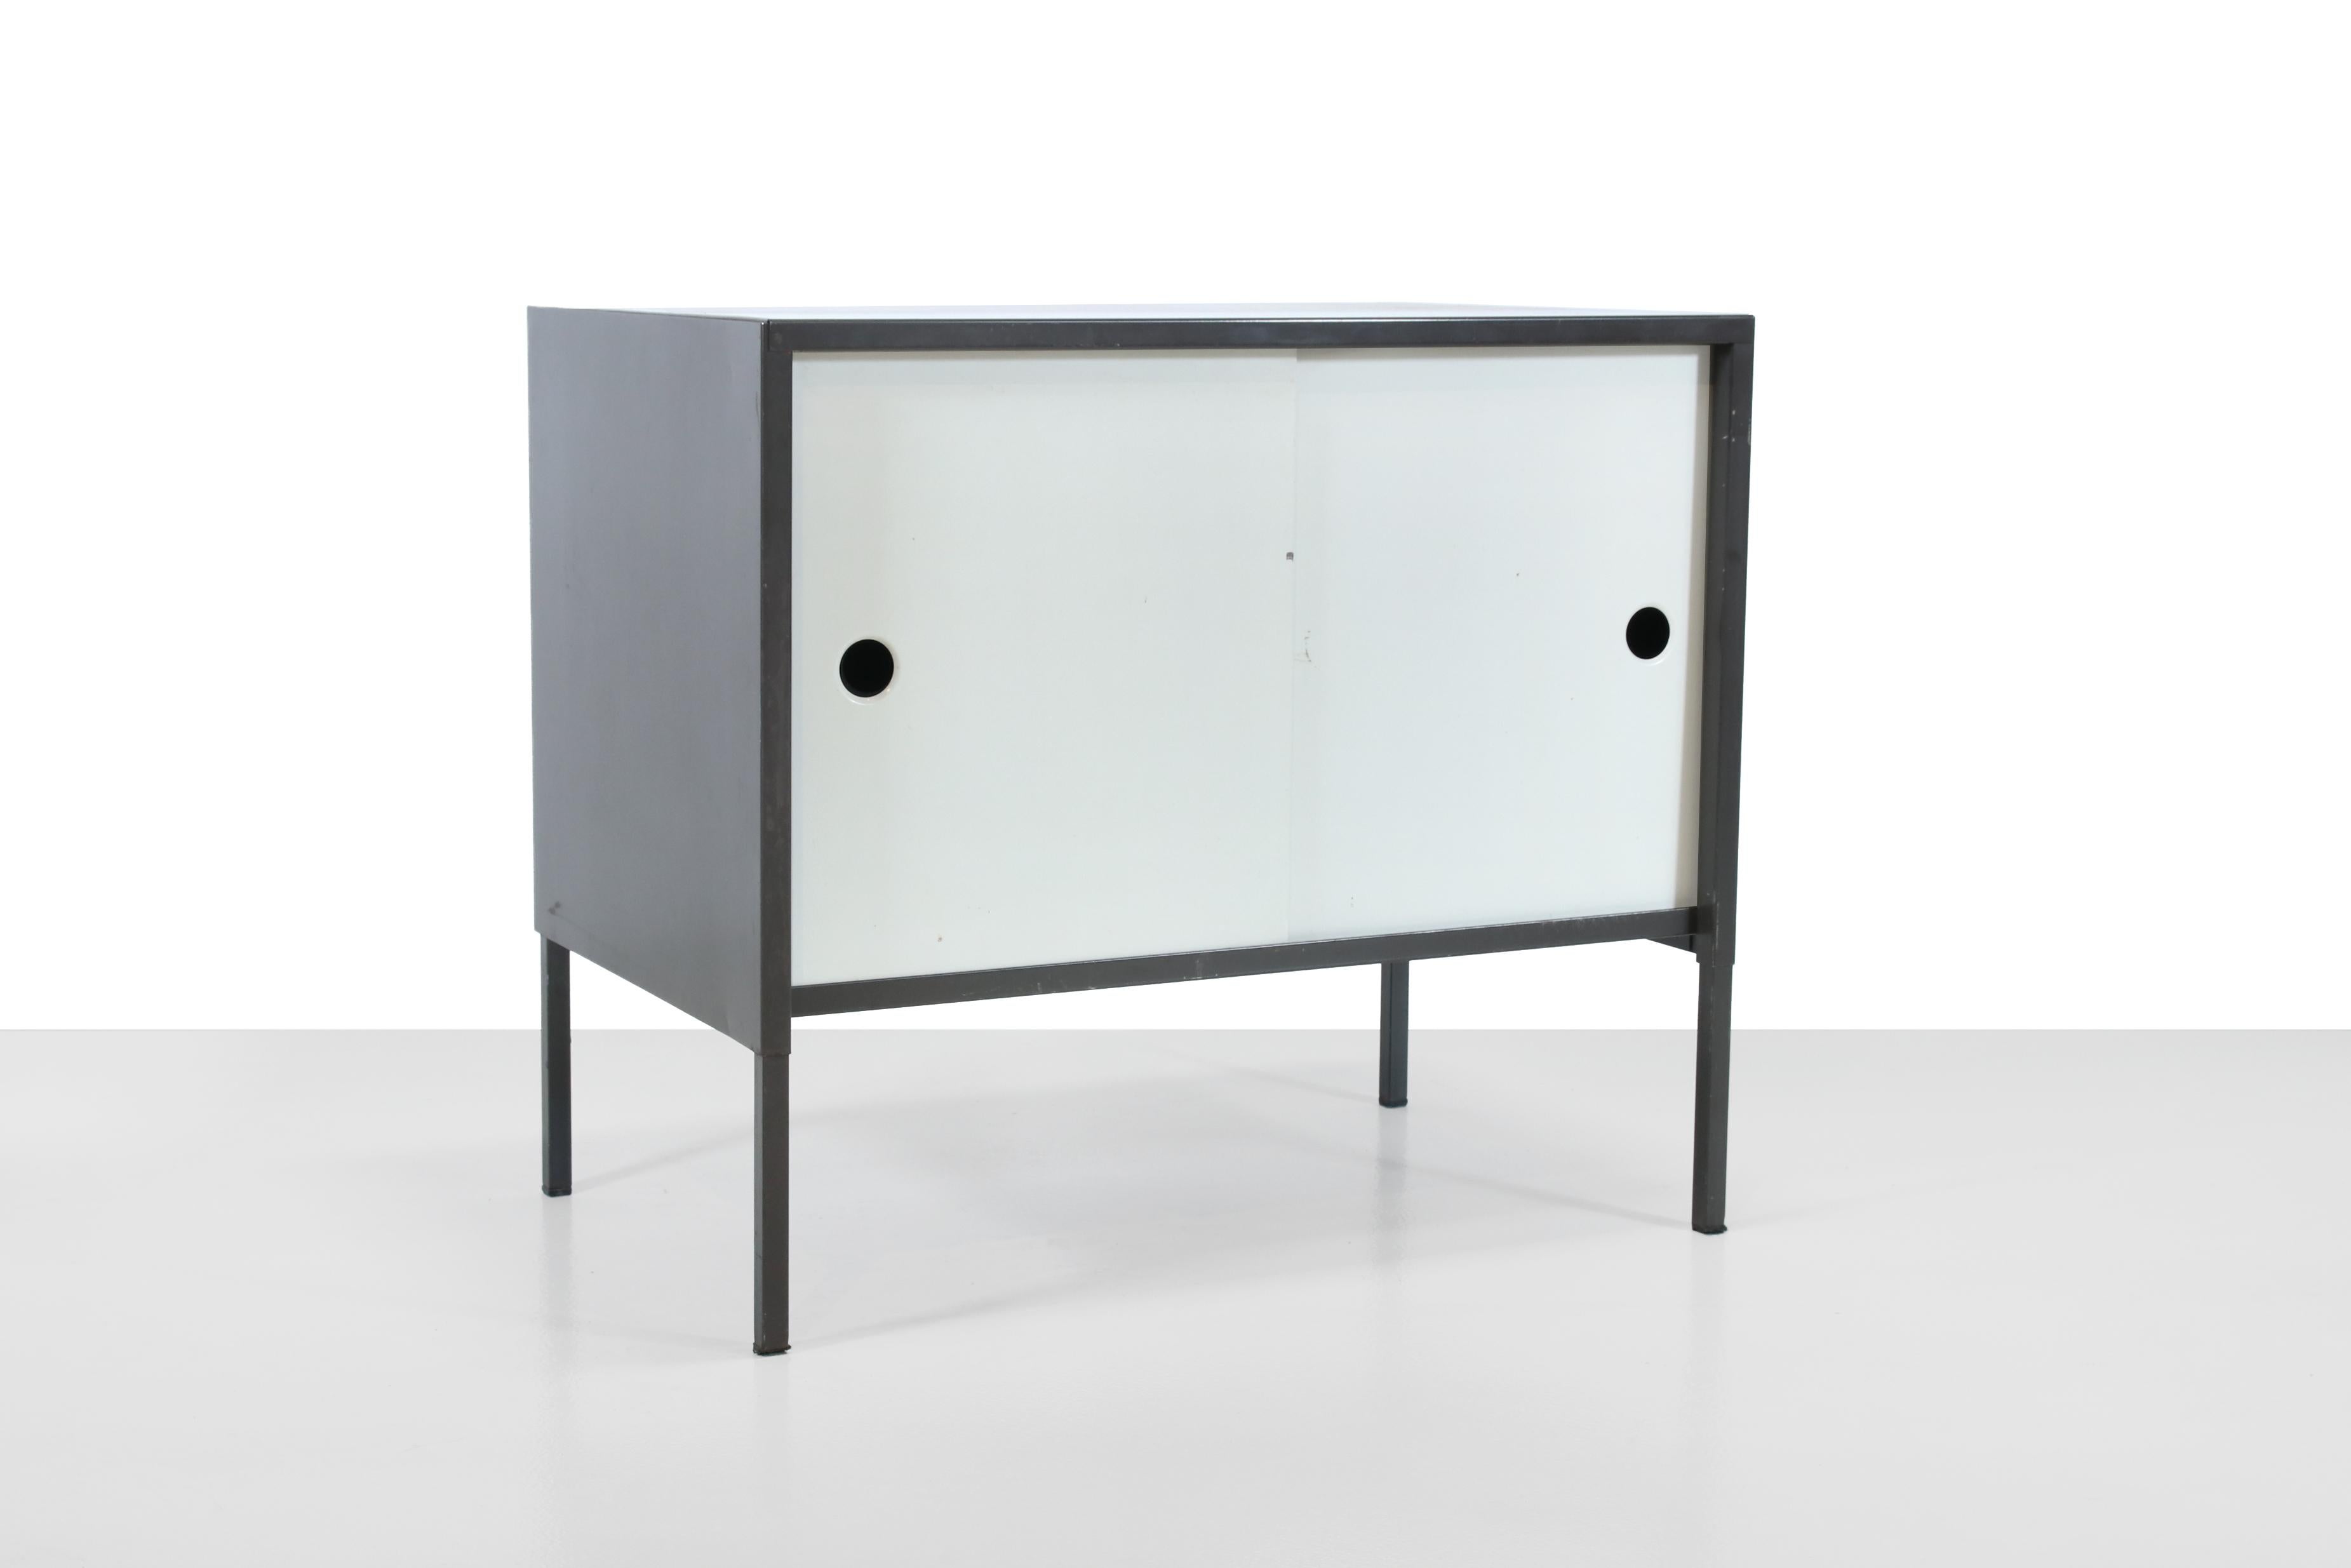 Lacquered Dutch Modernist Metal Coen de Vries Cabinet for Pilastro, 1960, The Netherlands